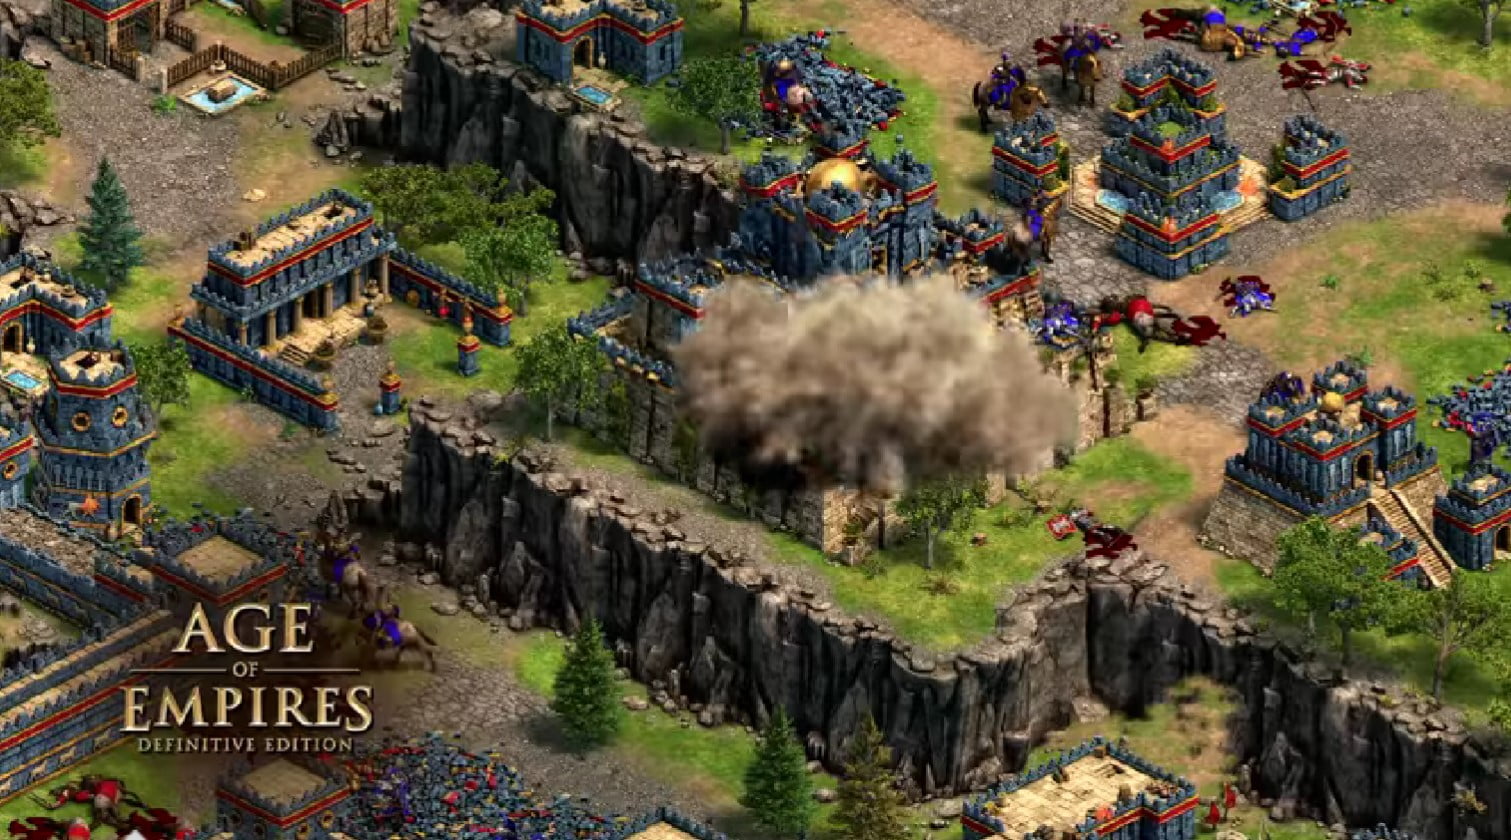 Play Age of Empires 2 on Mac